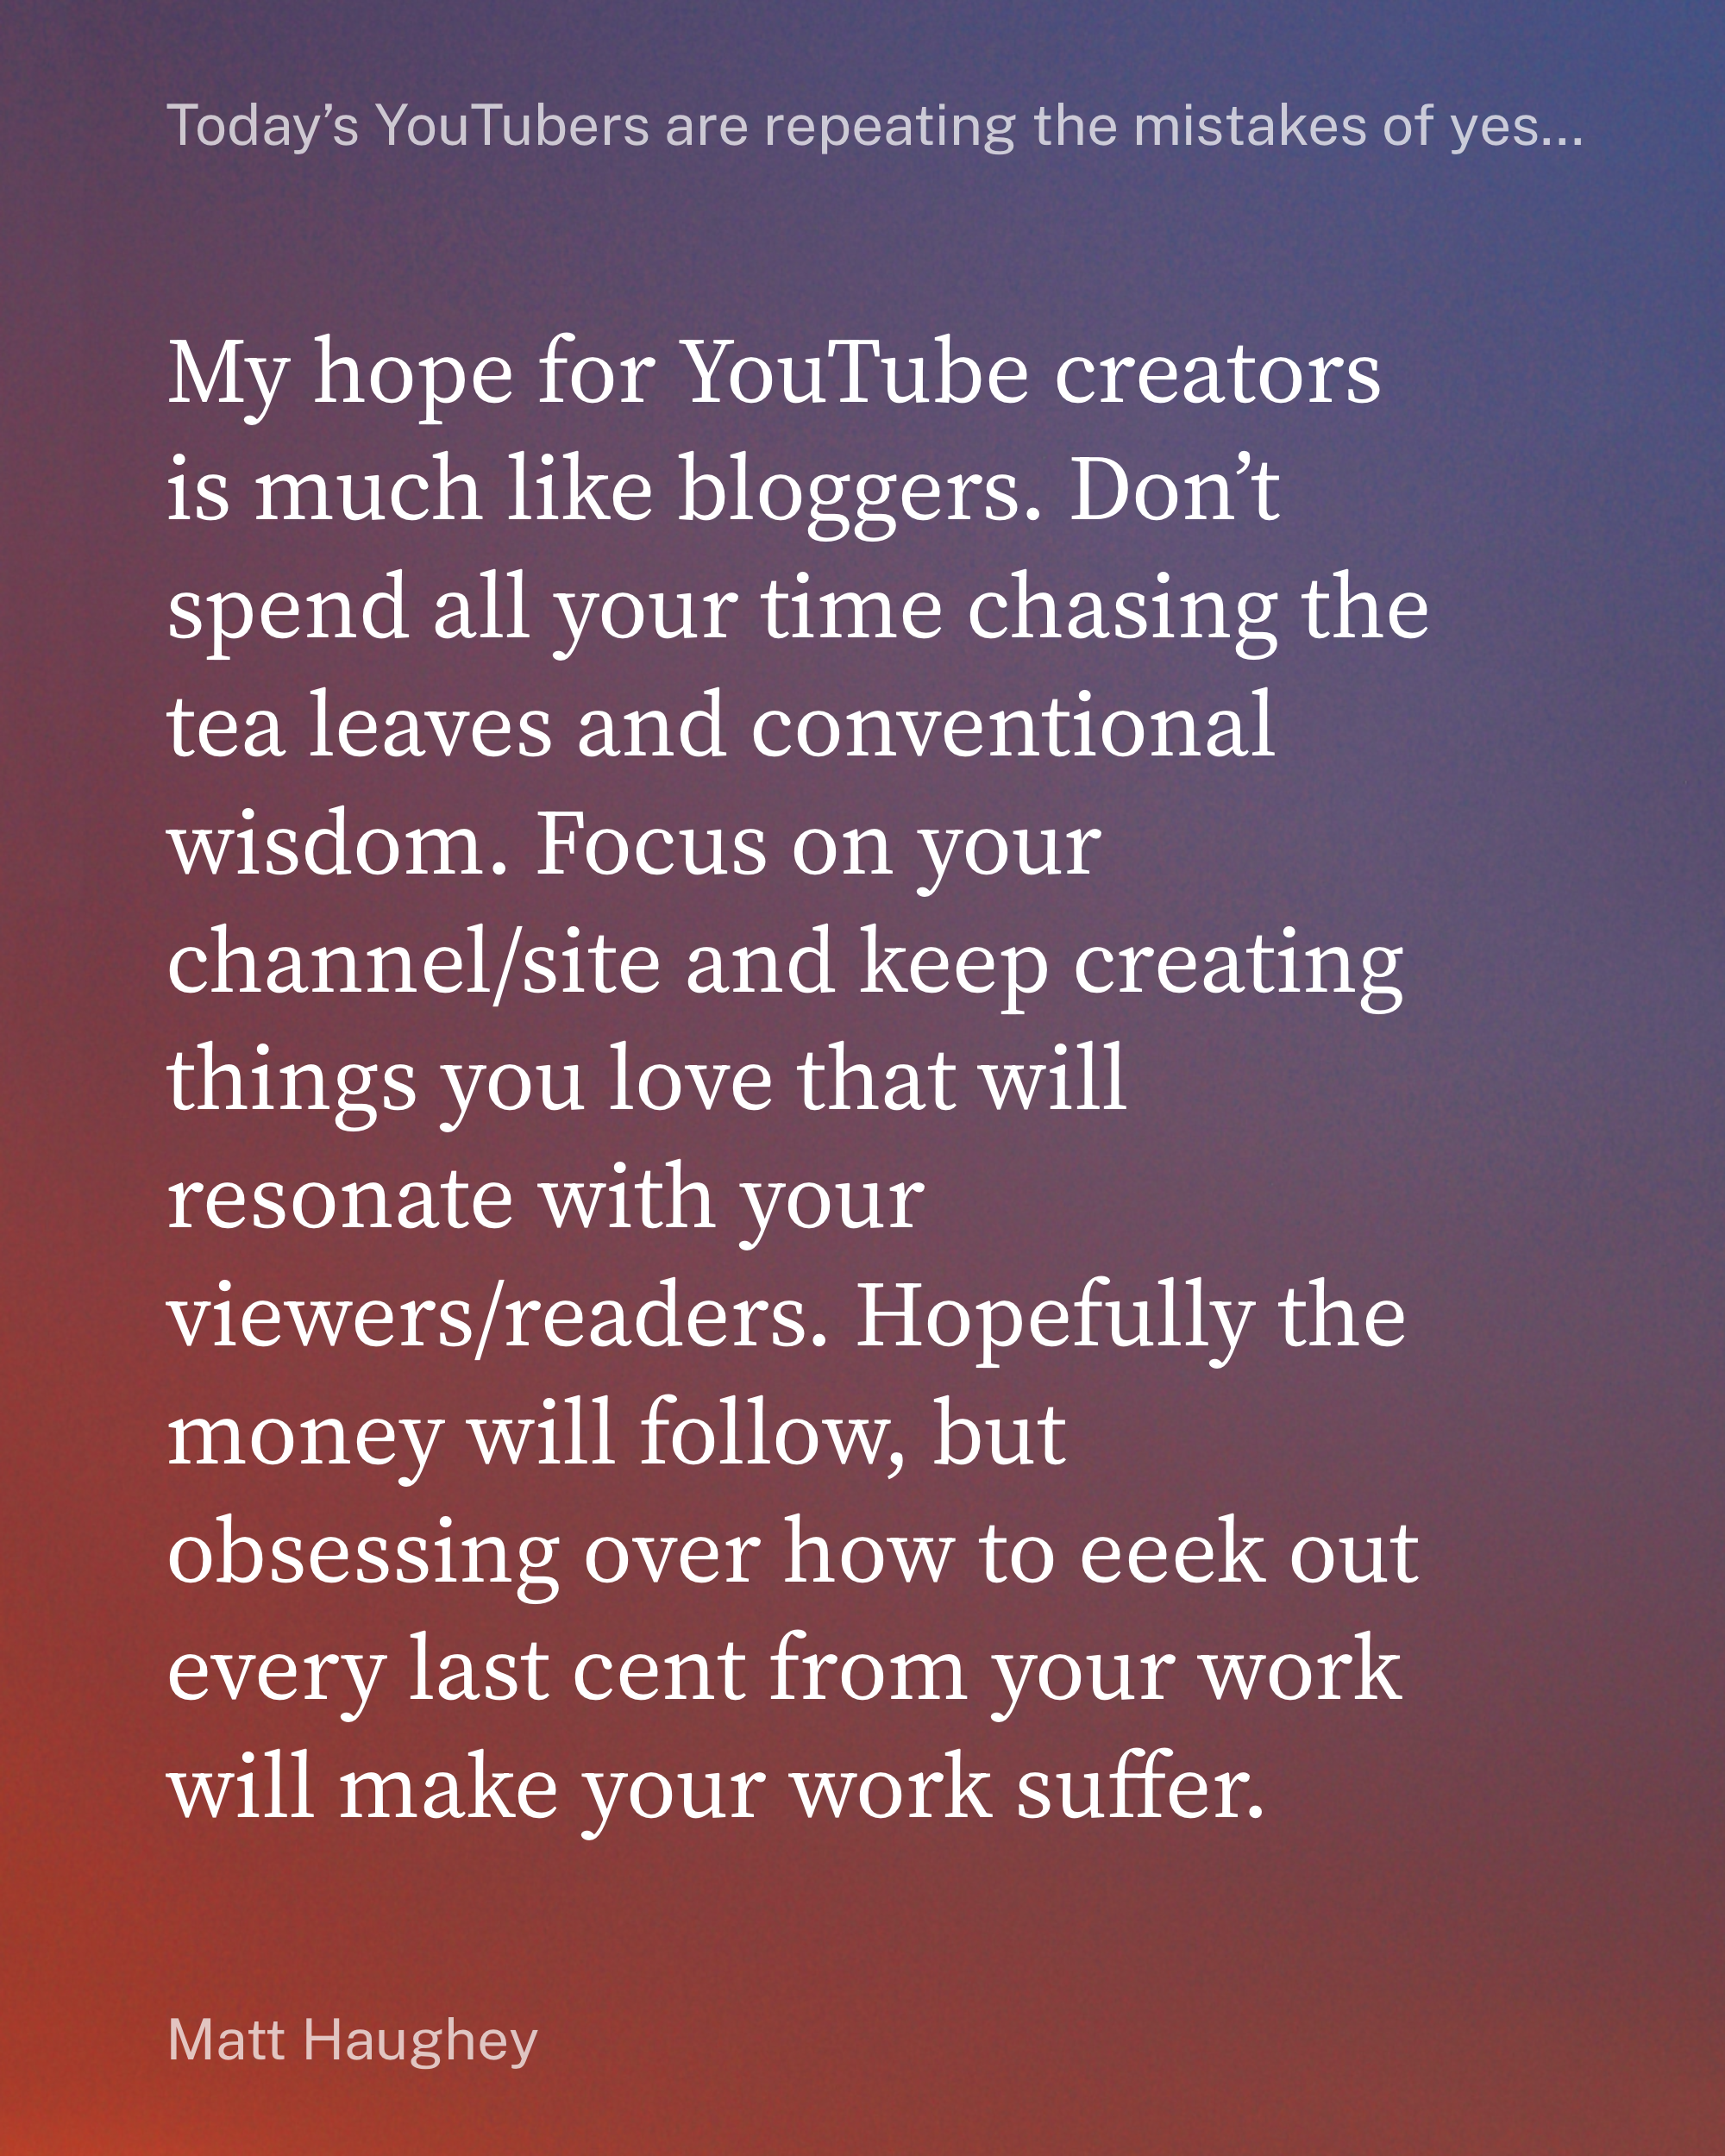 My hope for YouTube creators is much like bloggers. Don’t spend all your time chasing the tea leaves and conventional wisdom. Focus on your channel/site and keep creating things you love that will resonate with your viewers/readers. Hopefully the money will follow, but obsessing over how to eeek out every last cent from your work will make your work suffer.